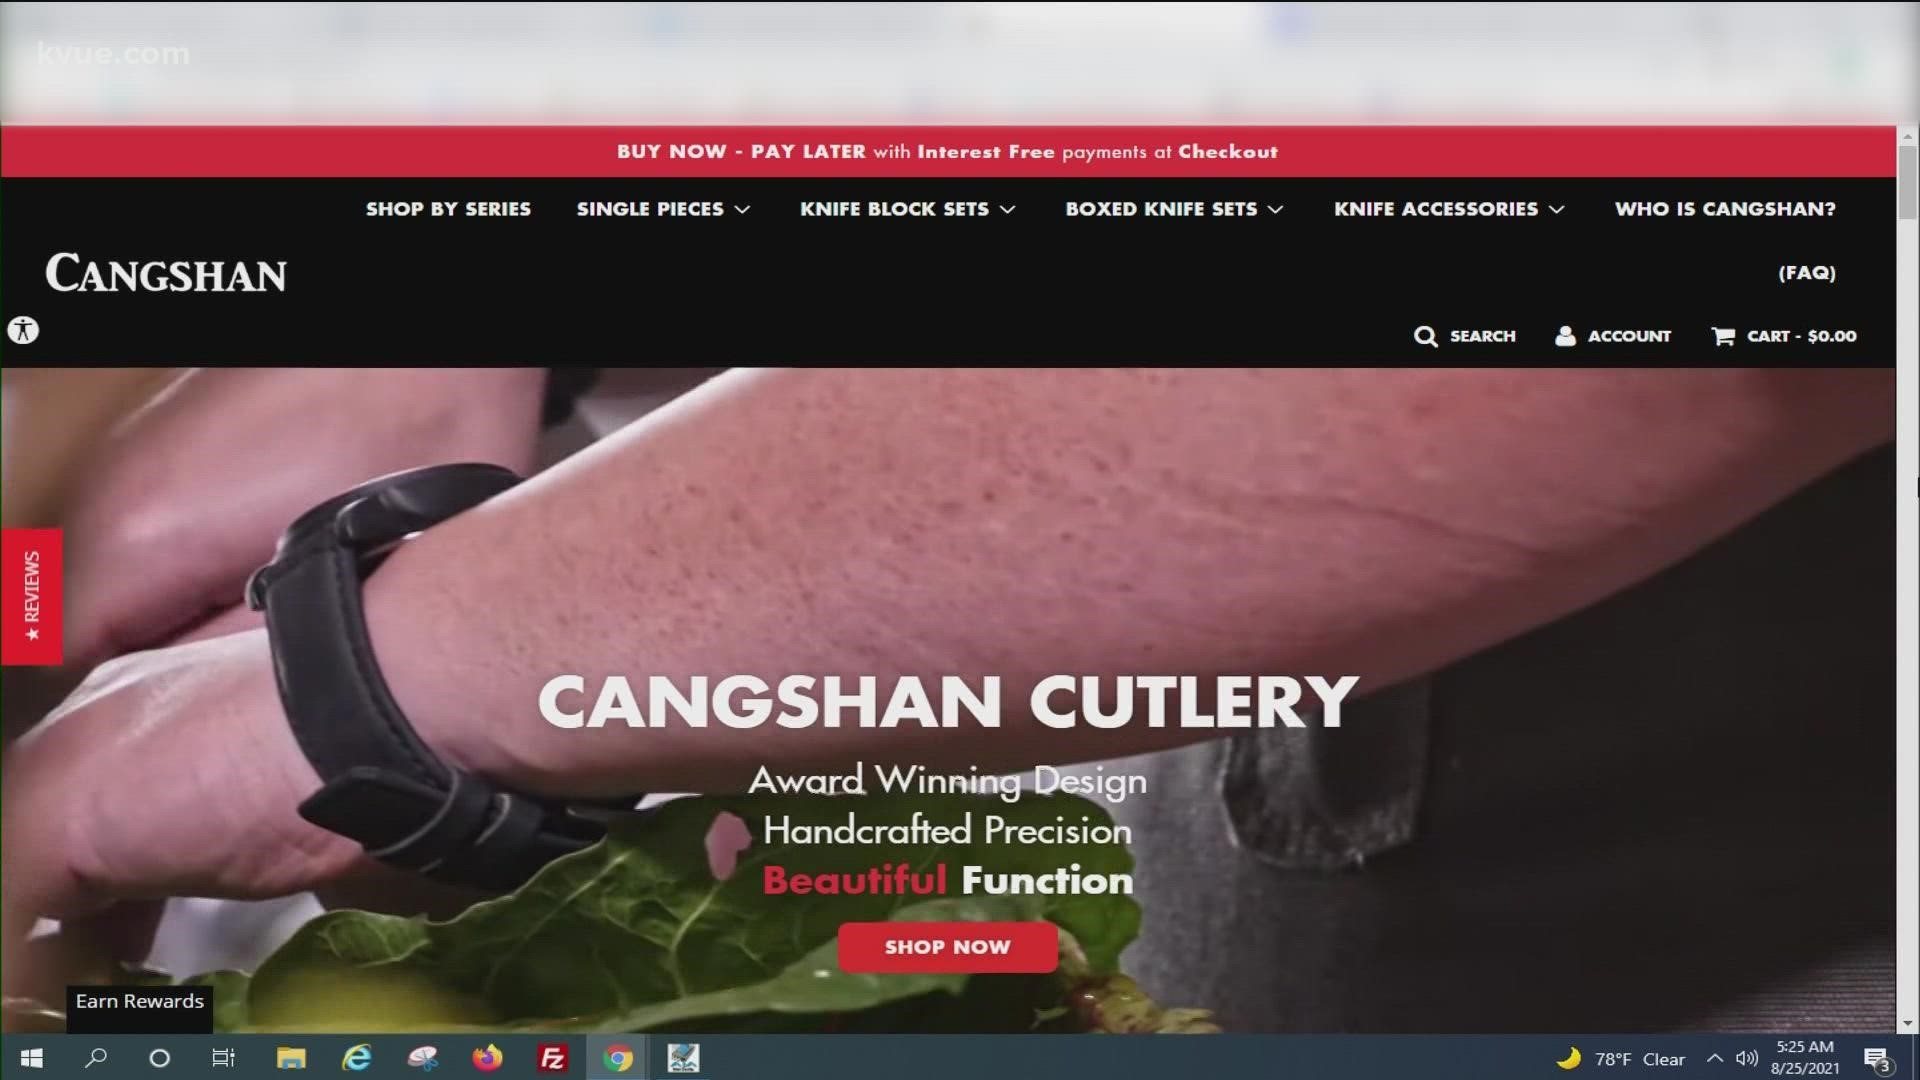 Cangshan Cutlery is moving from southern California to Leander.